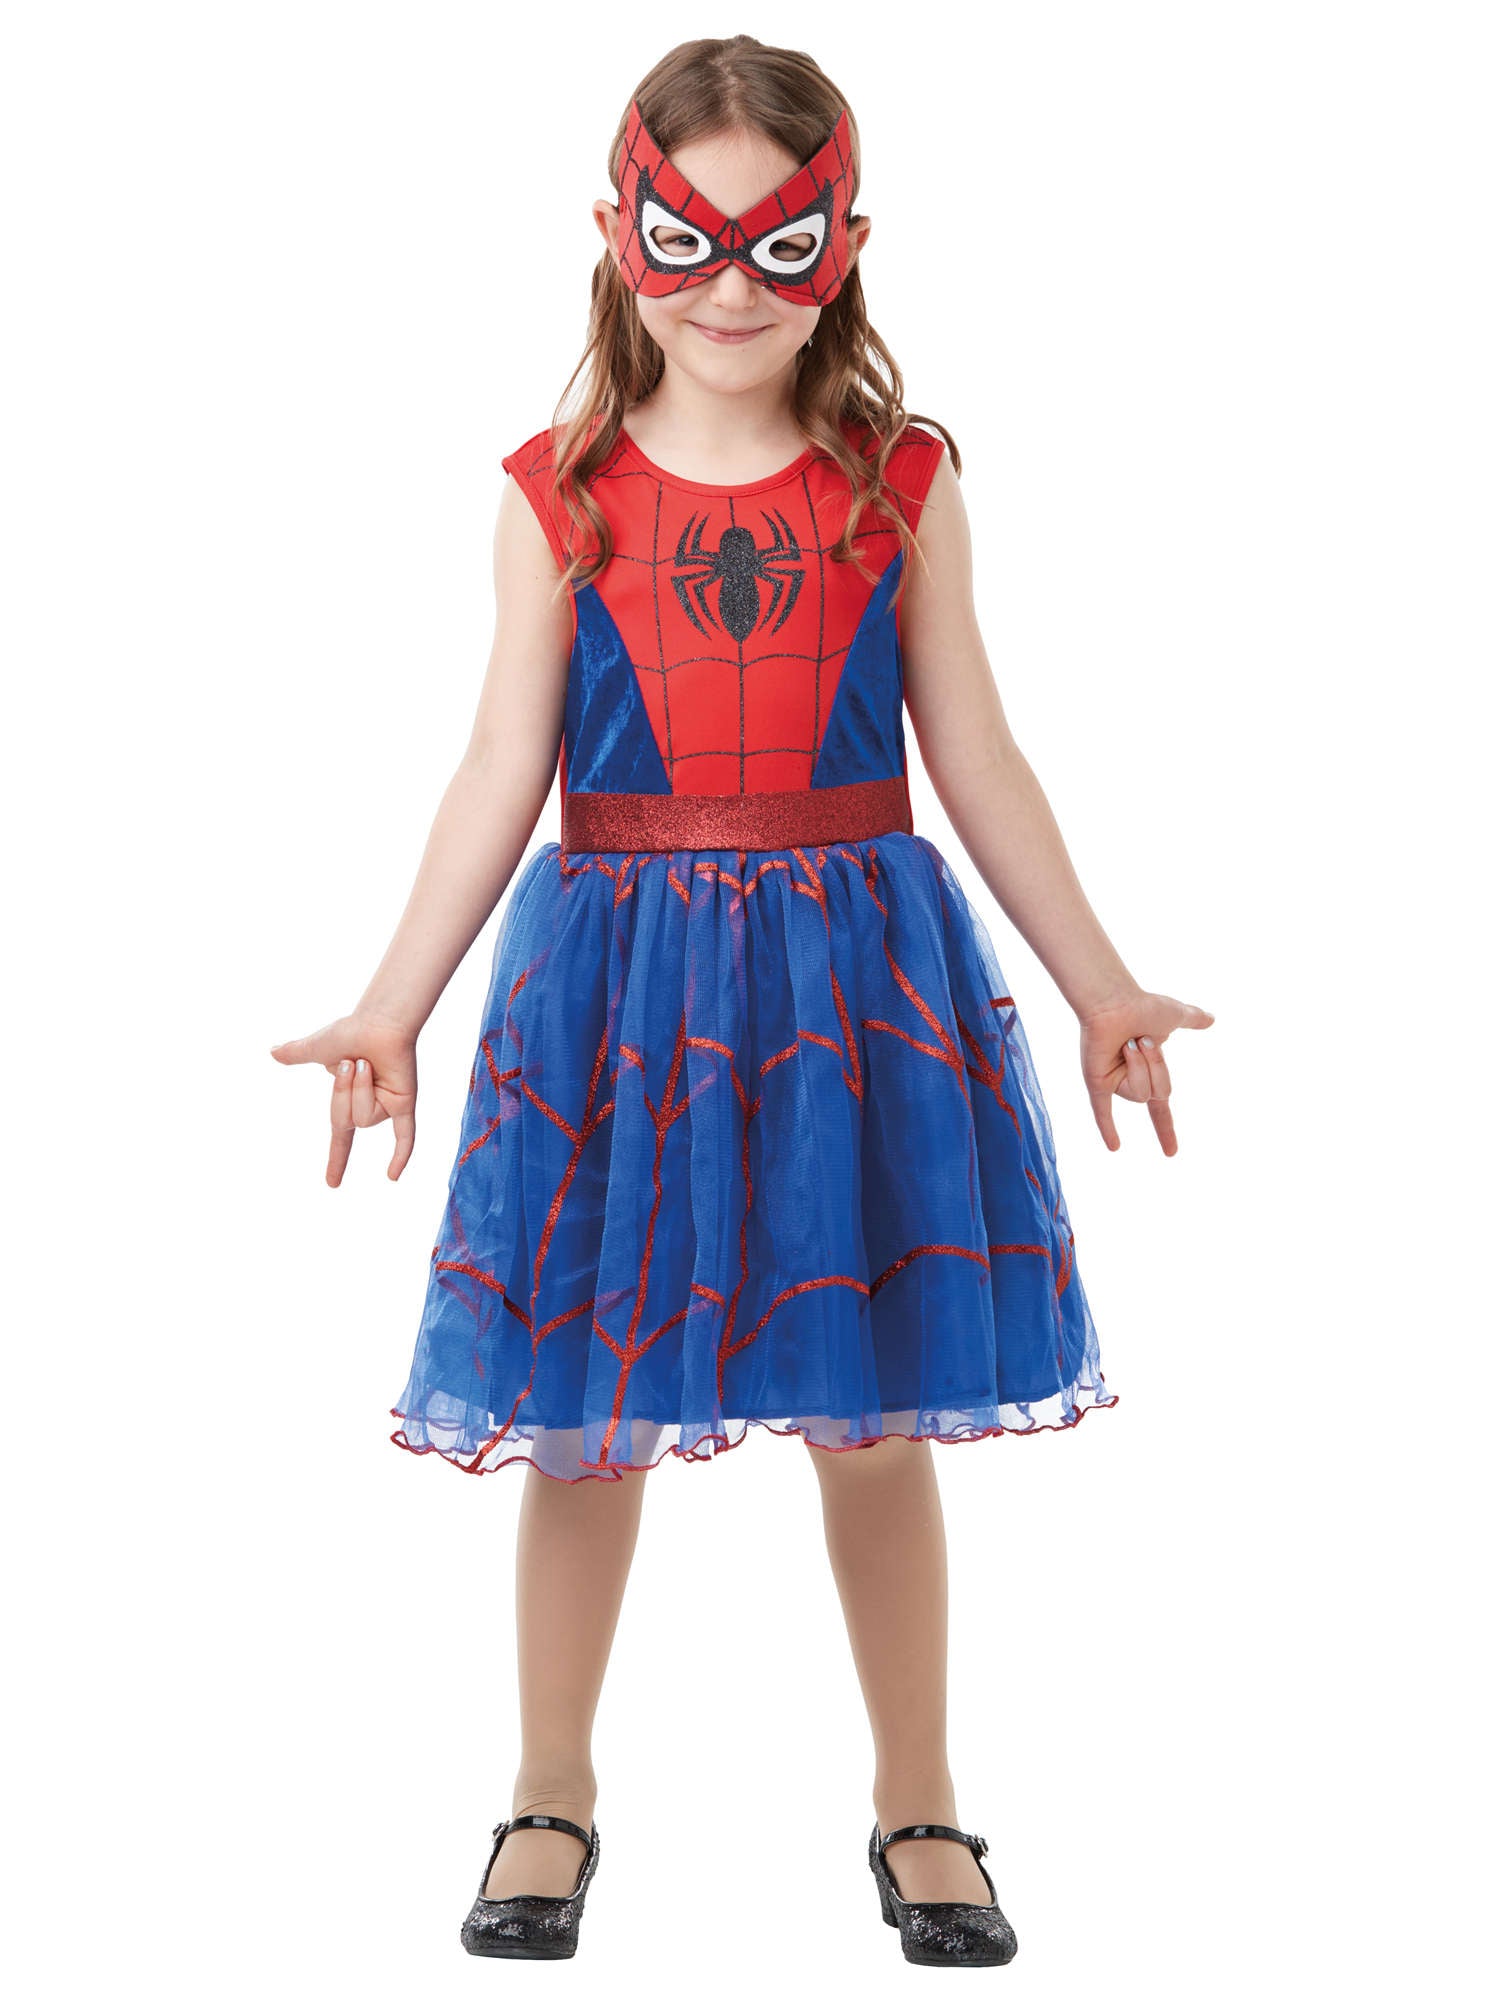 Spider-Girl, Spider-Man, Multi, Marvel, Kids Costumes, Small, Front